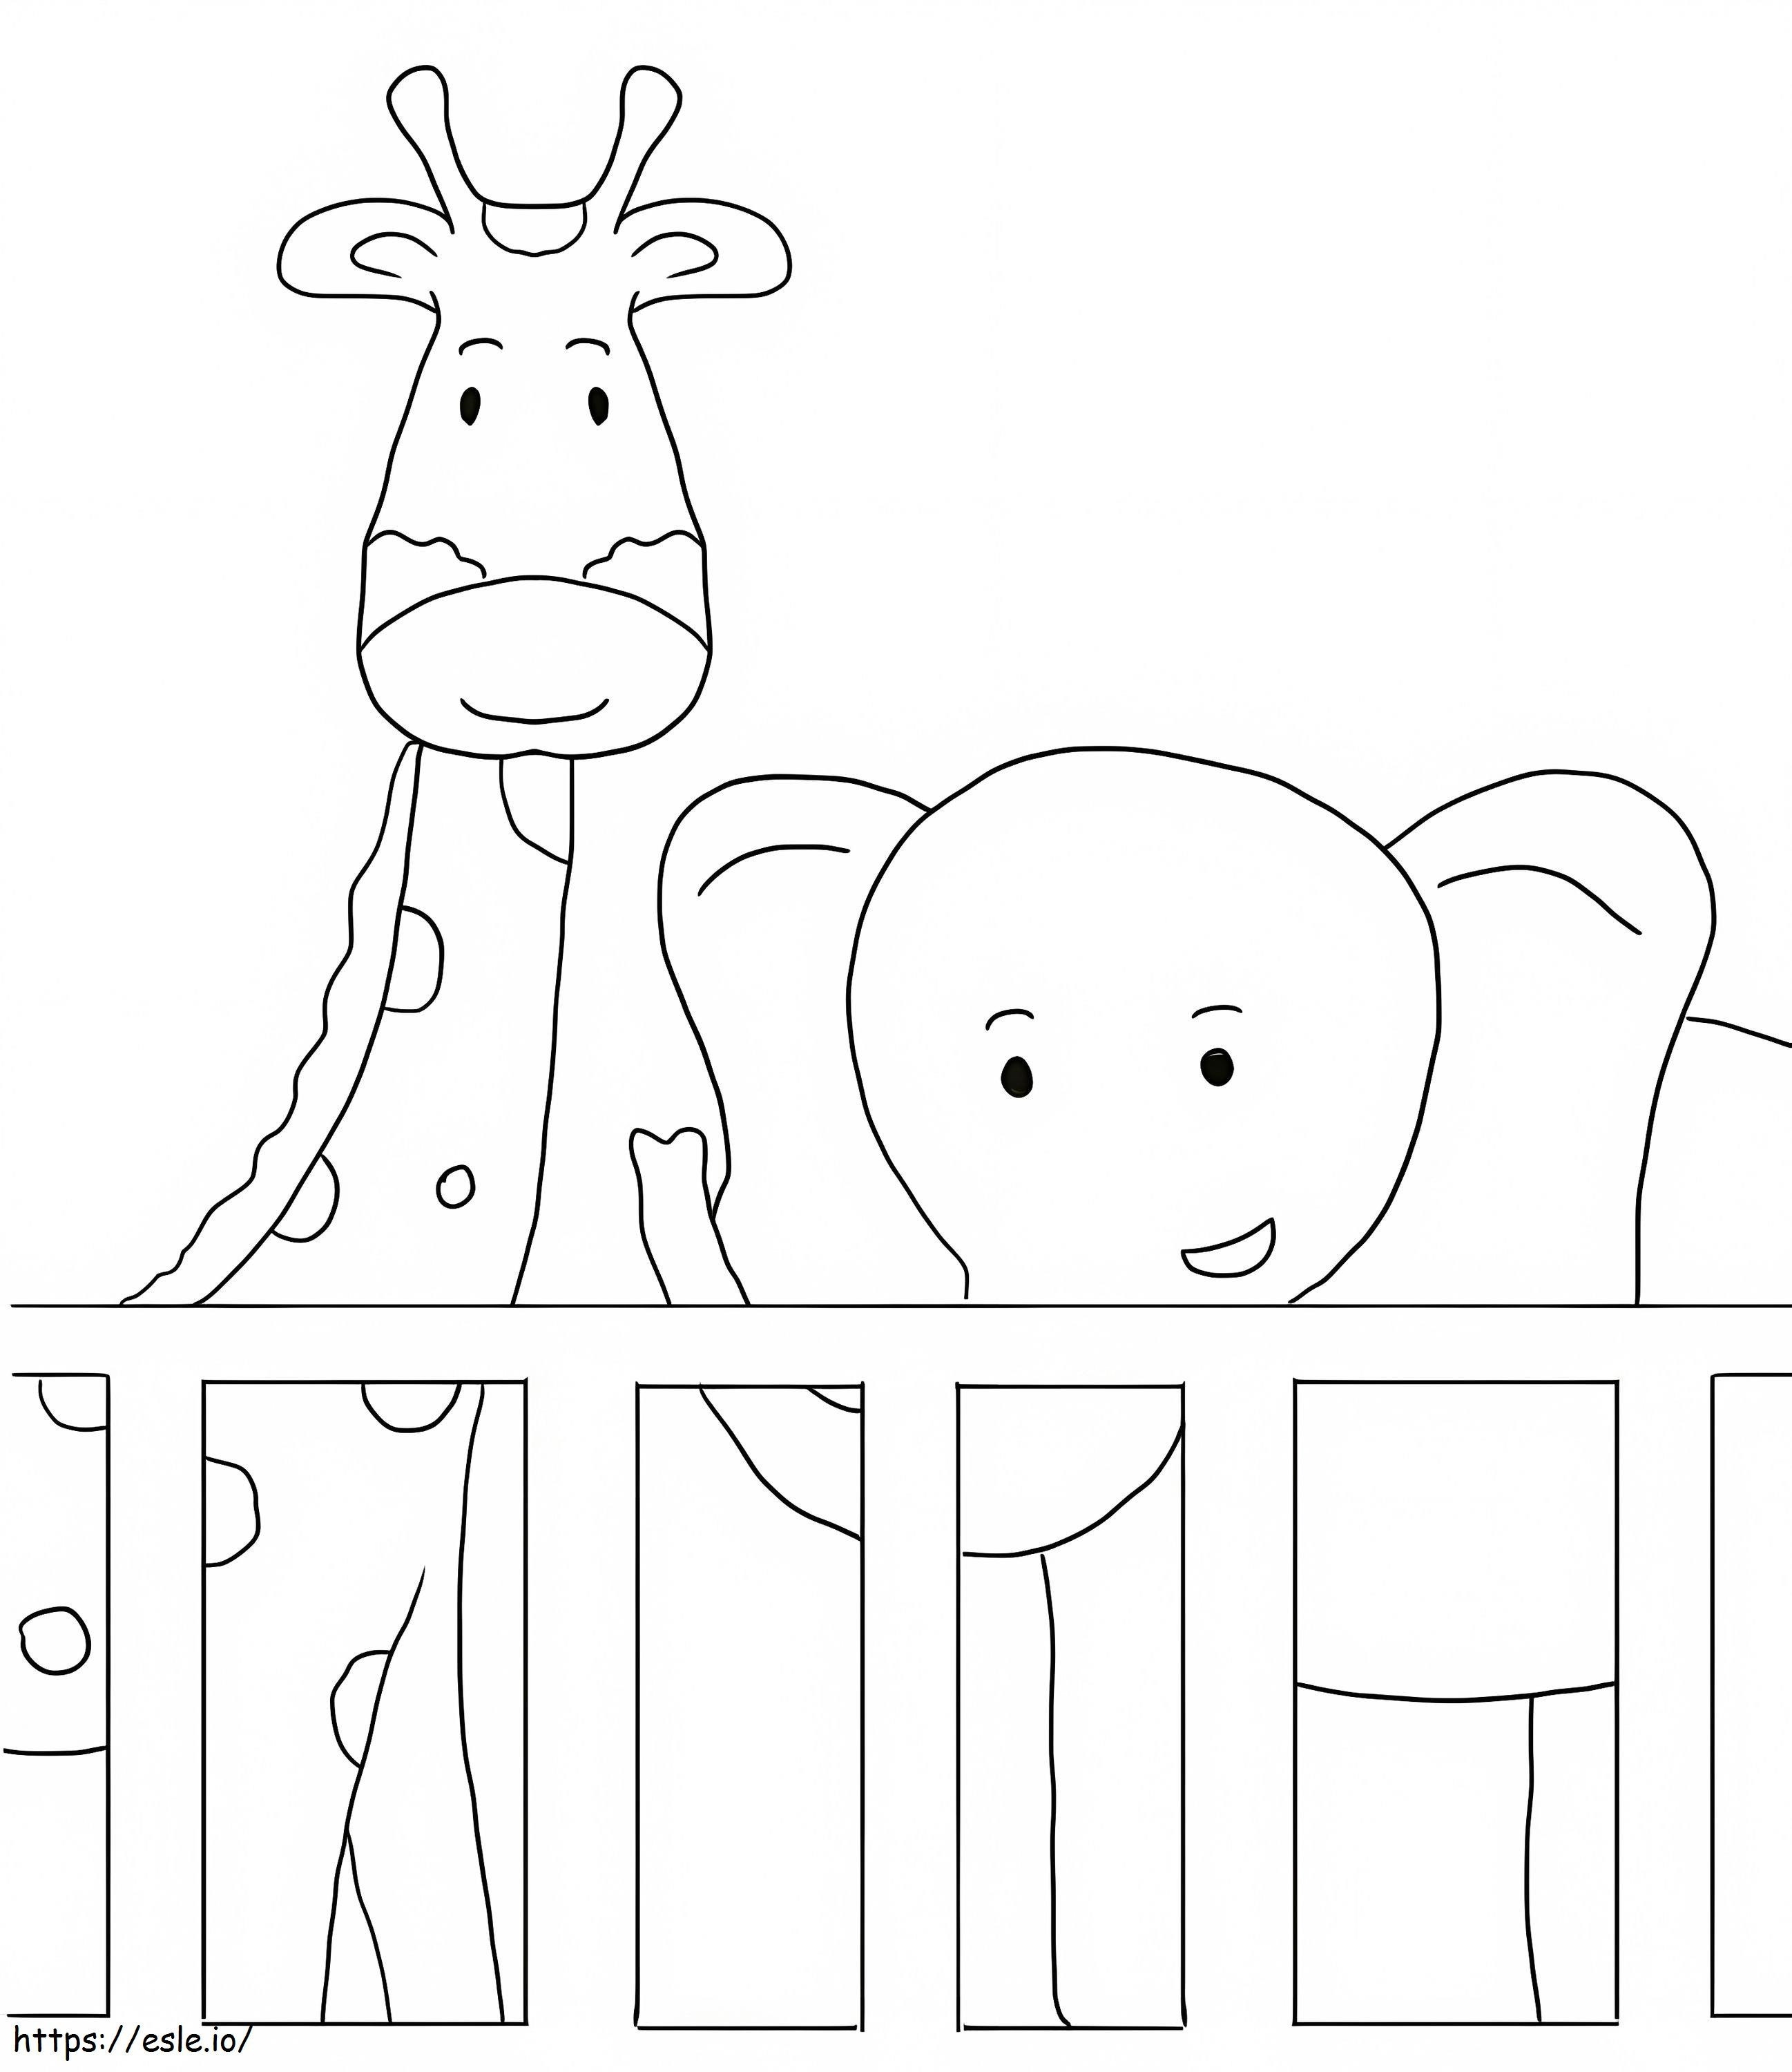 Adorable Zoo Animals coloring page